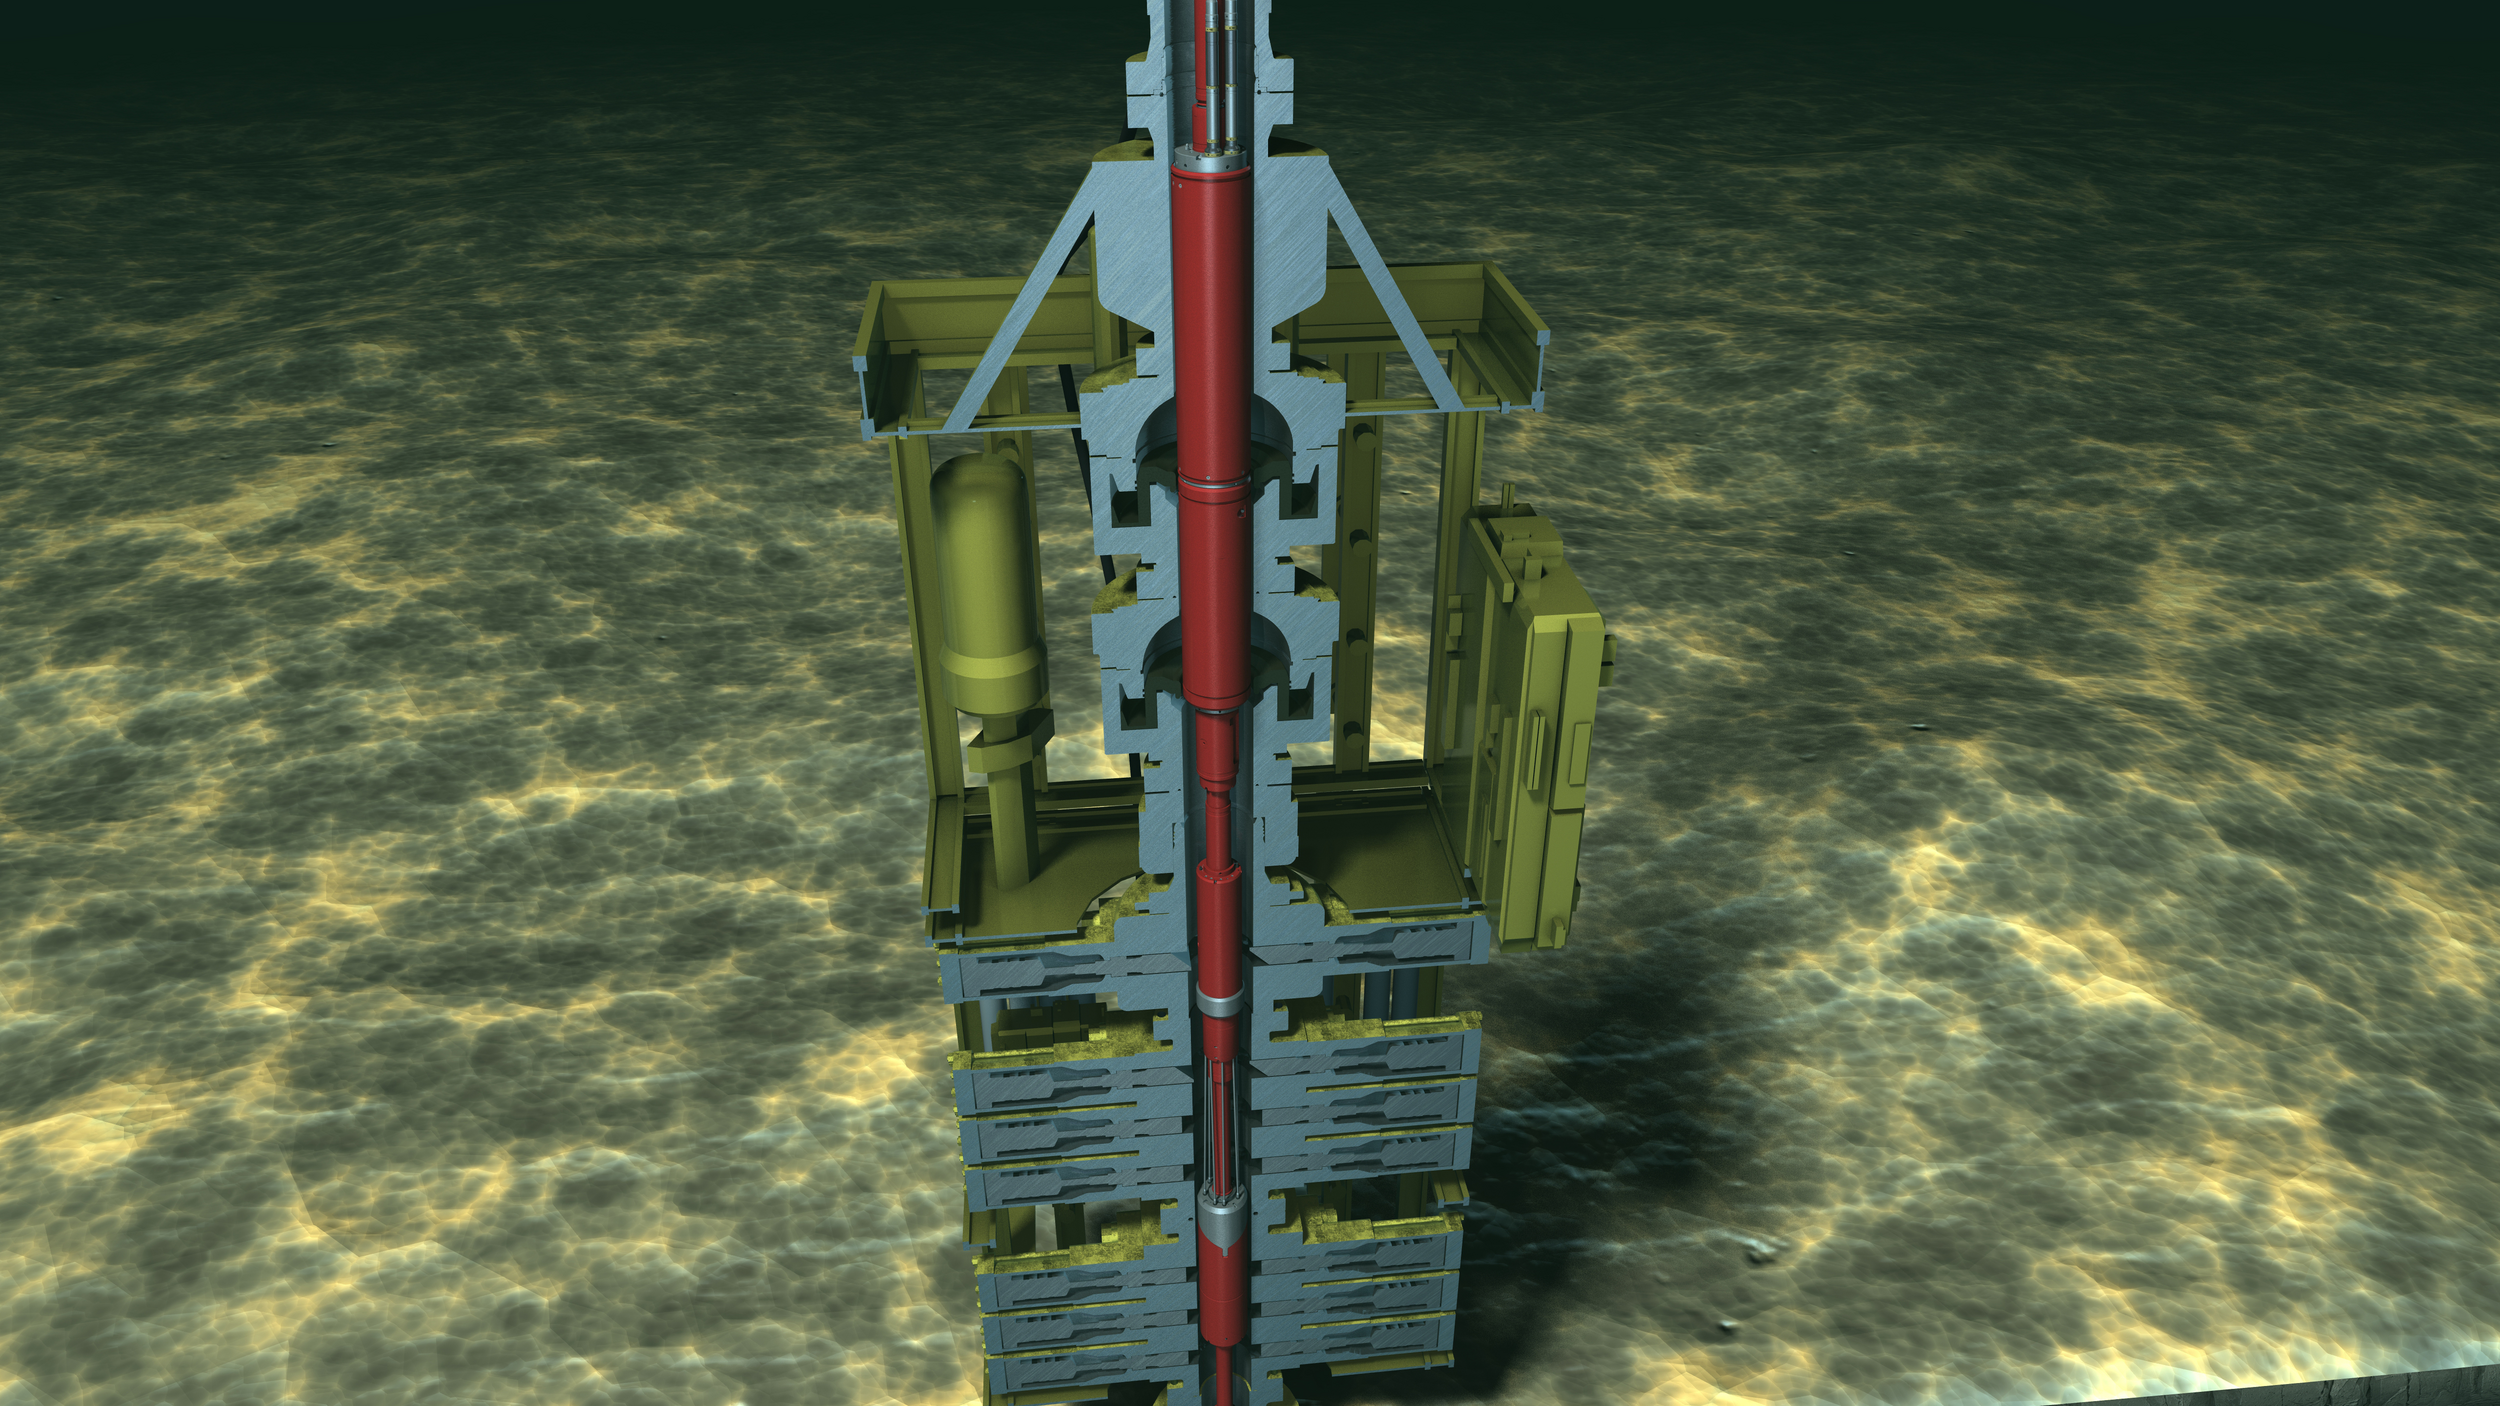  Dash® large bore subsea safety system streamlines operation